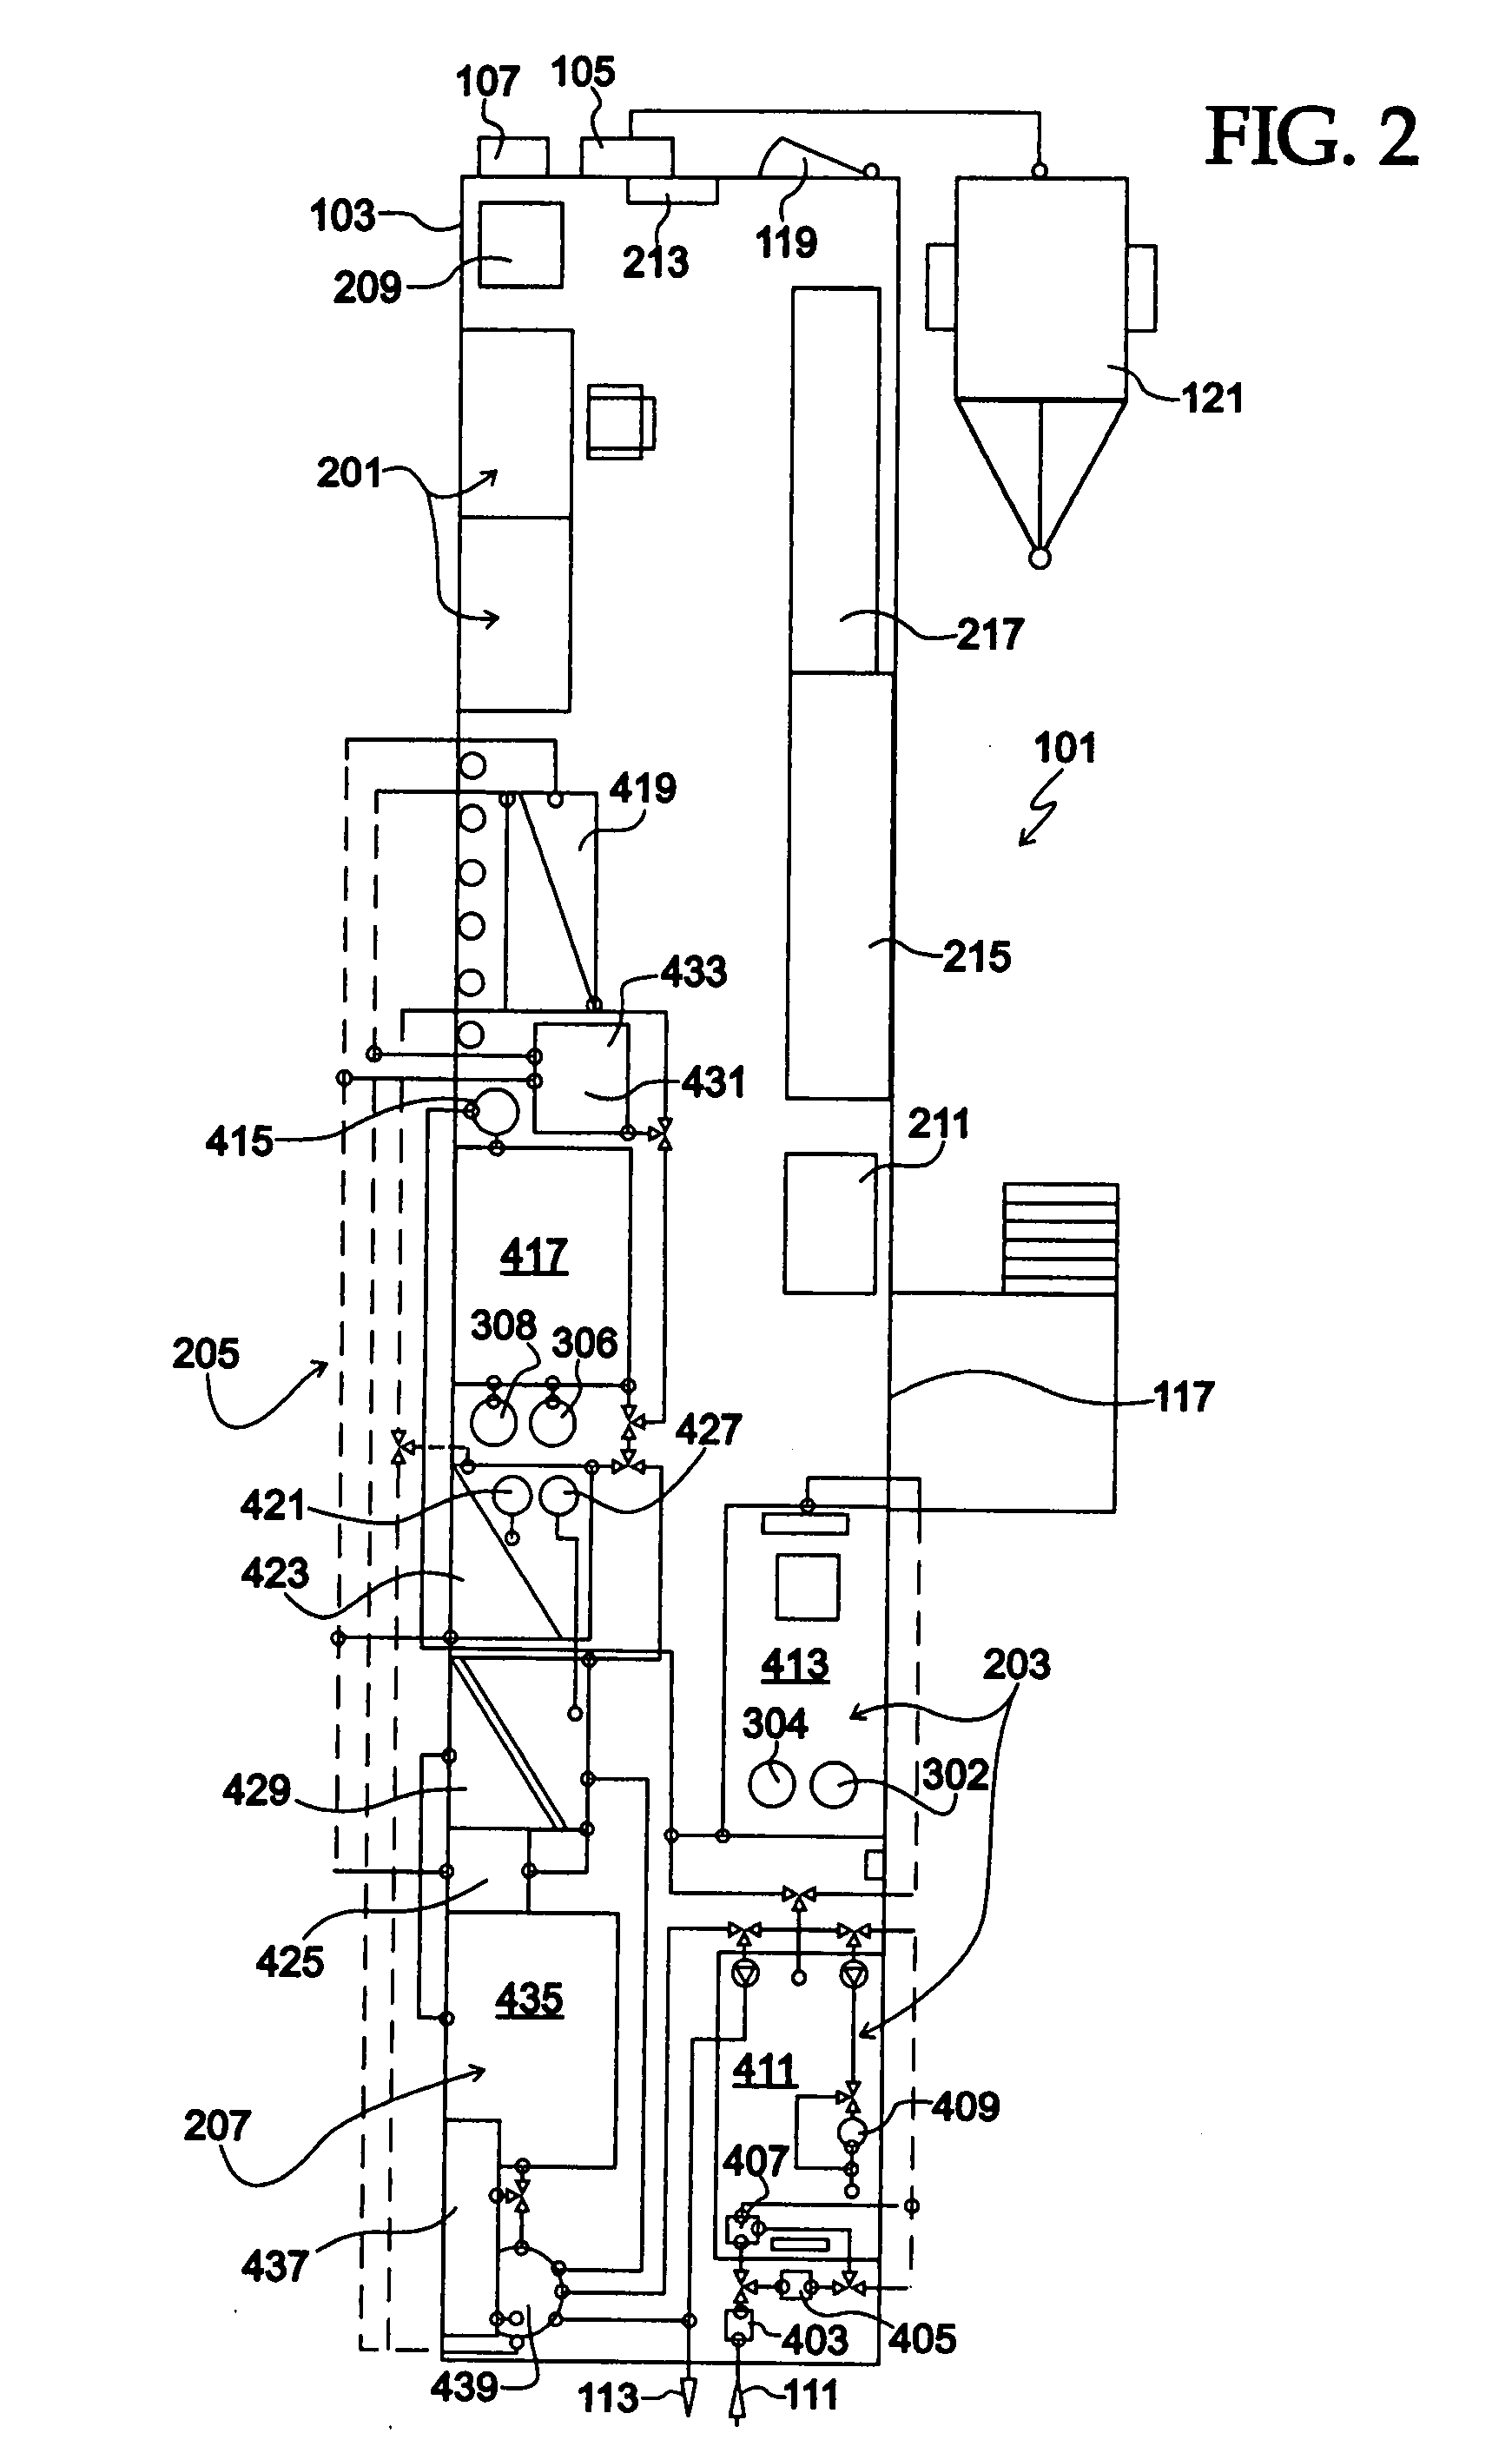 Mobile station and methods for diagnosing and modeling site specific effluent treatment facility requirements